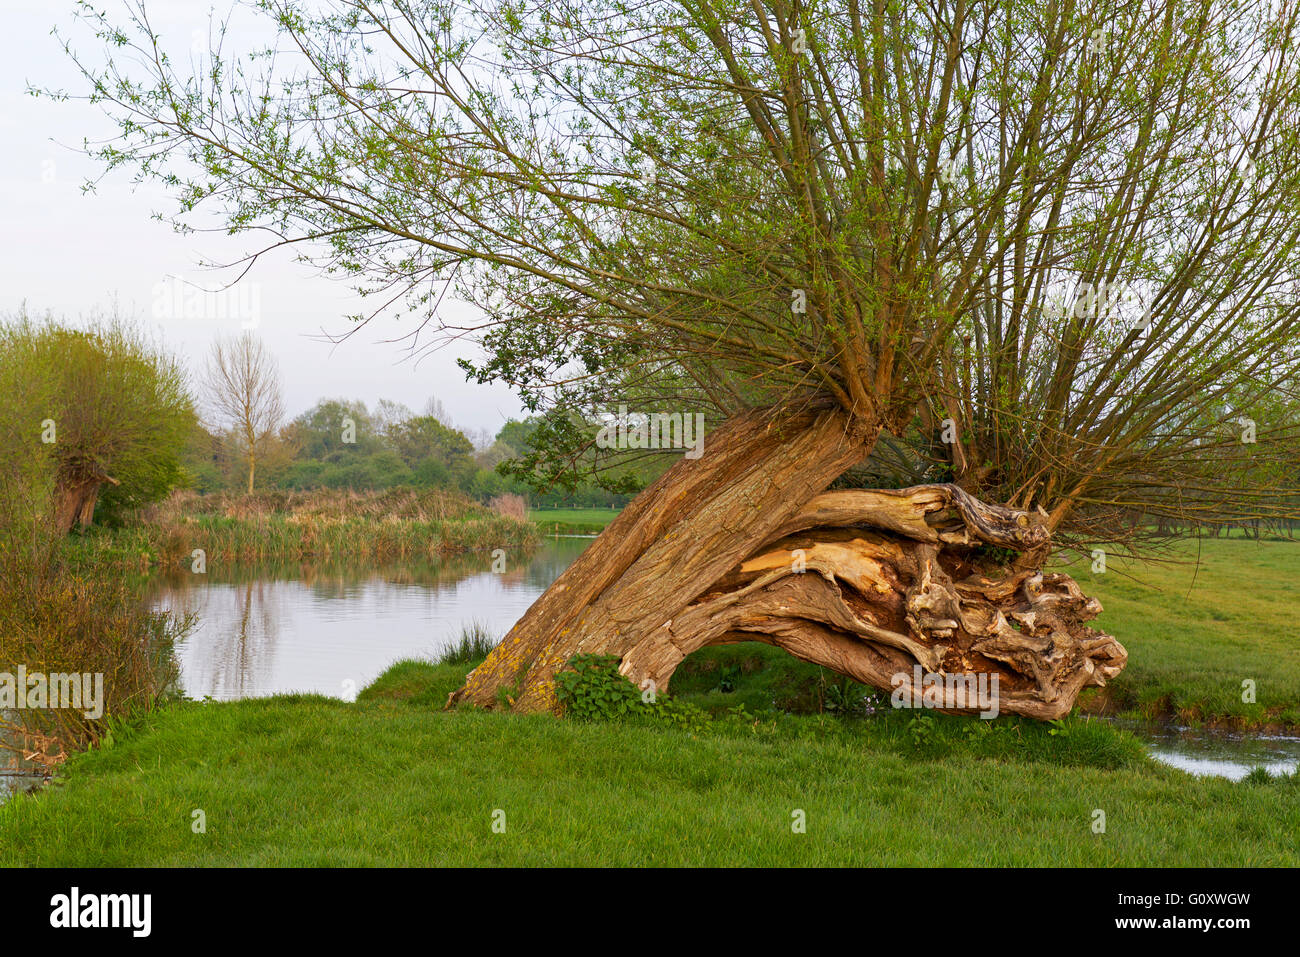 Pollarded willow tree by the River Stour, Dedham Vale, Essex, England UK Stock Photo